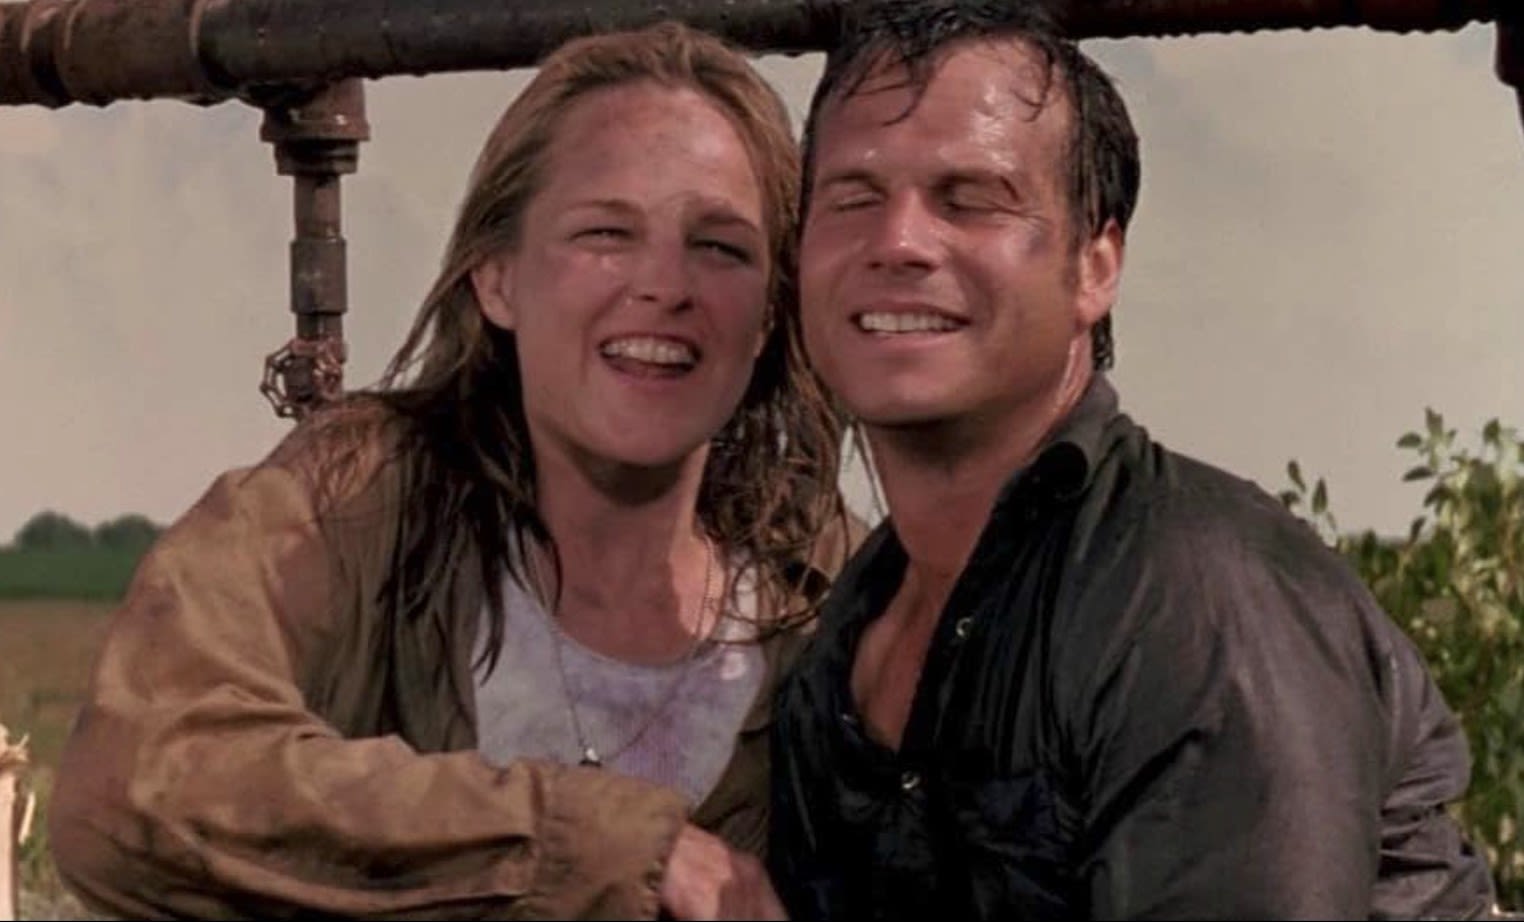 Here’s Our 1996 Review of Twister From the Archives